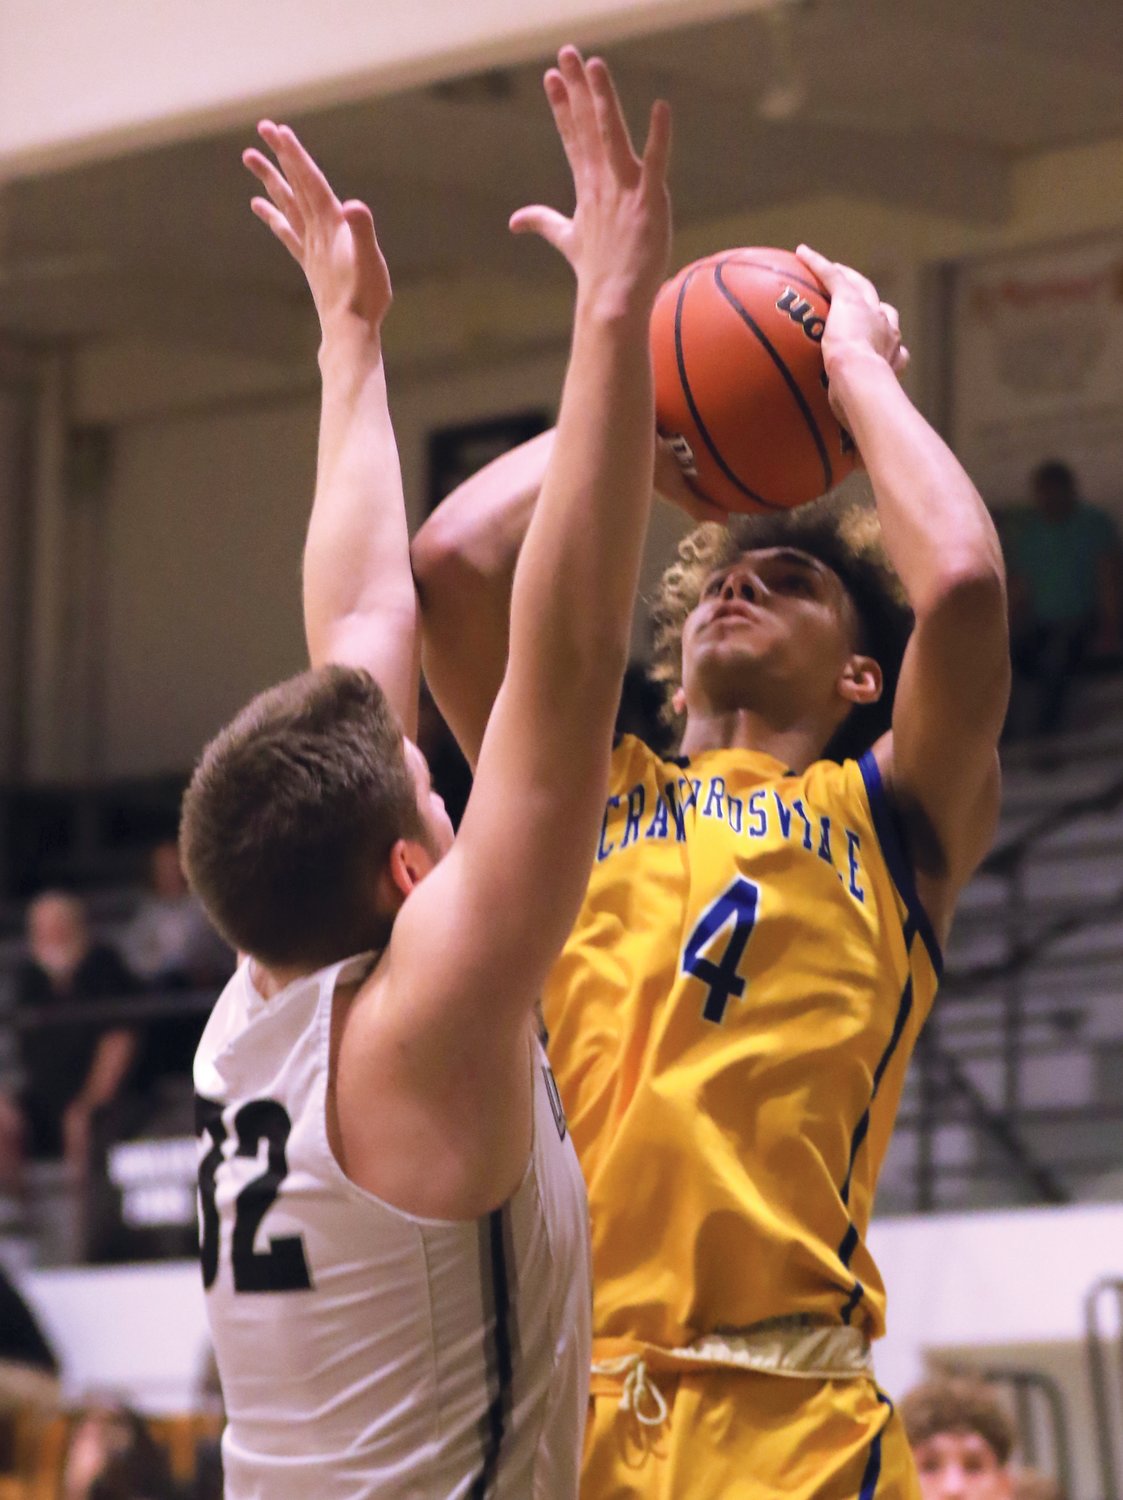 Crawfordsville's Jesse Hall scored 17 points in the Athenians 60-52 overtime loss at Parke Heritage on Saturday.